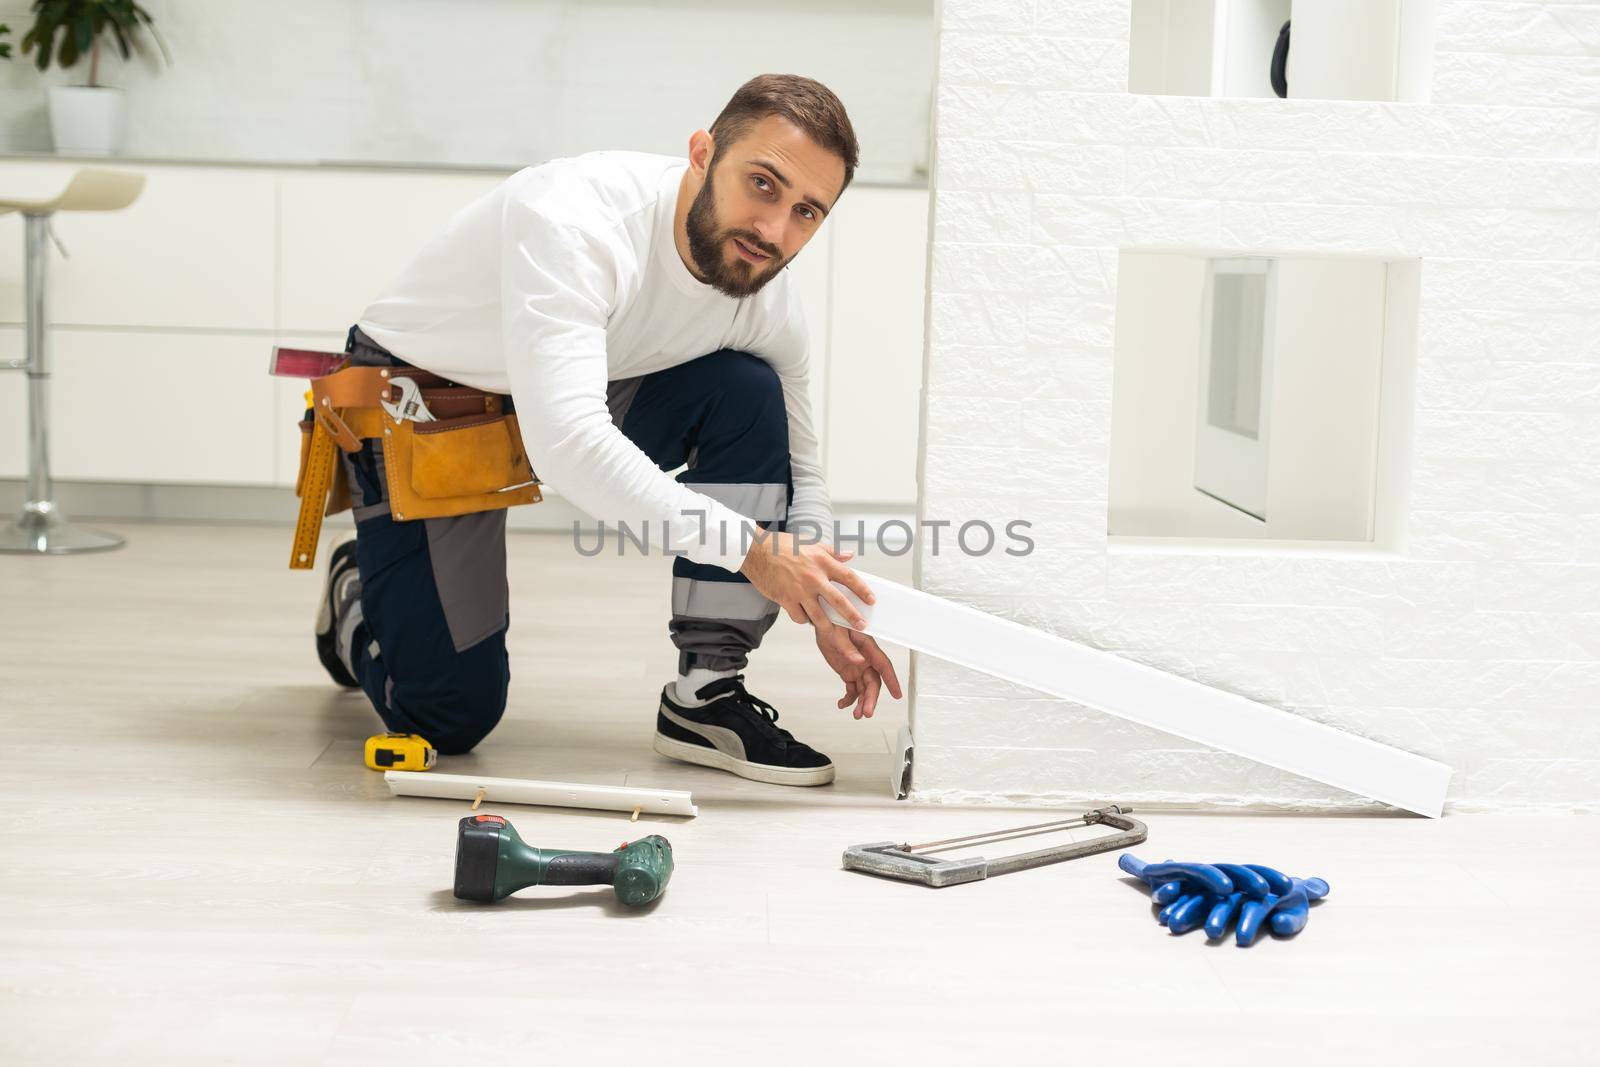 A man installs a floor skirting board. Fixing the plastic skirting board with screws to the wall. Home renovation